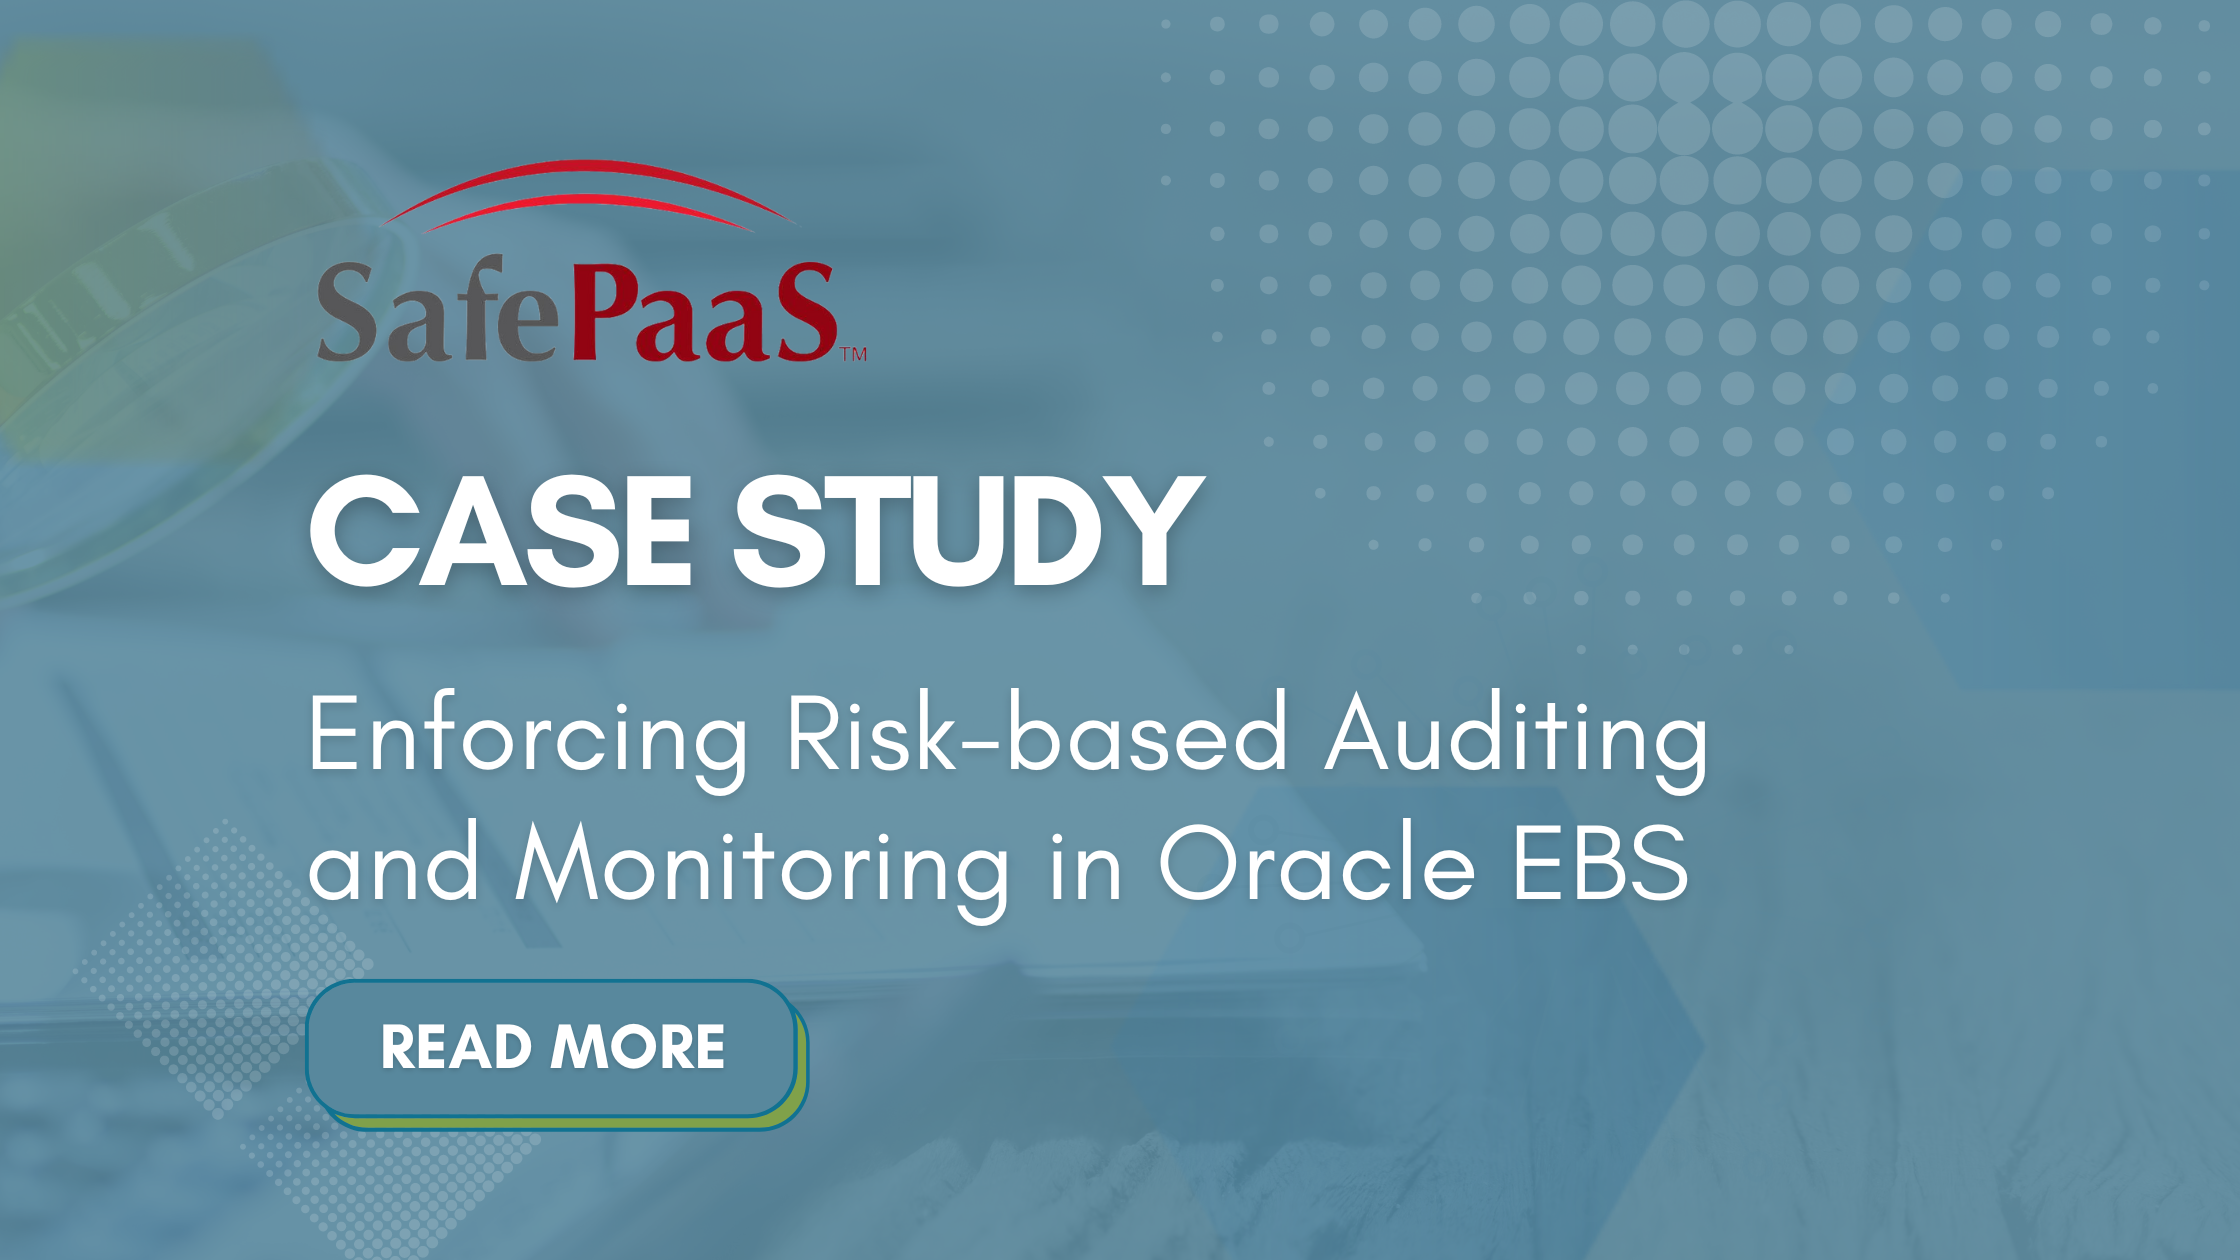 Enforcing Risk-based Auditing and Monitoring  - SafePaaS